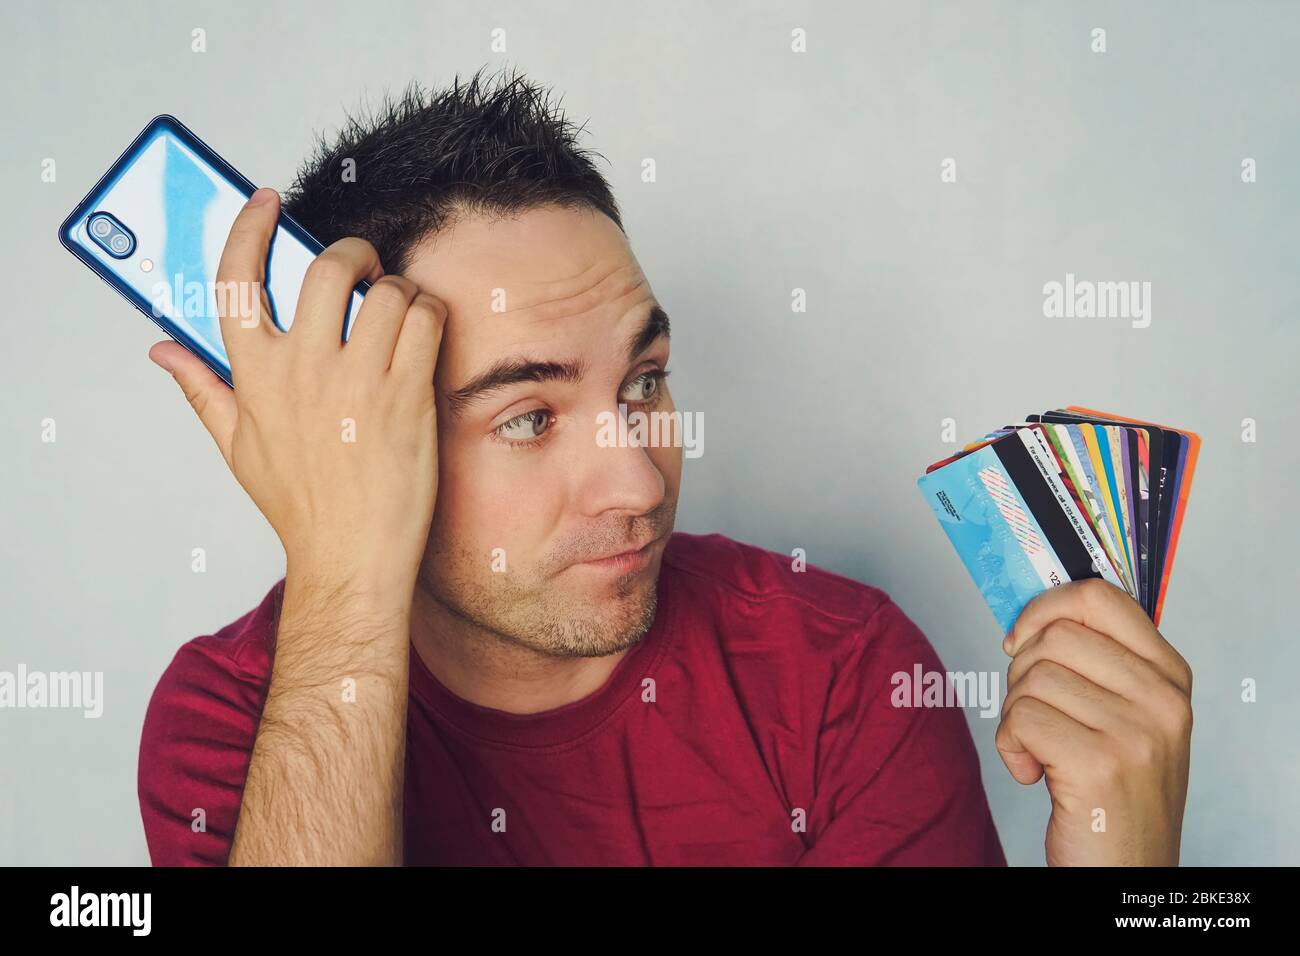 choosing a credit card to pay. Young handsome man thinking about online shopping via internet, wearing red t shirt, standing against blue wall, holdin Stock Photo